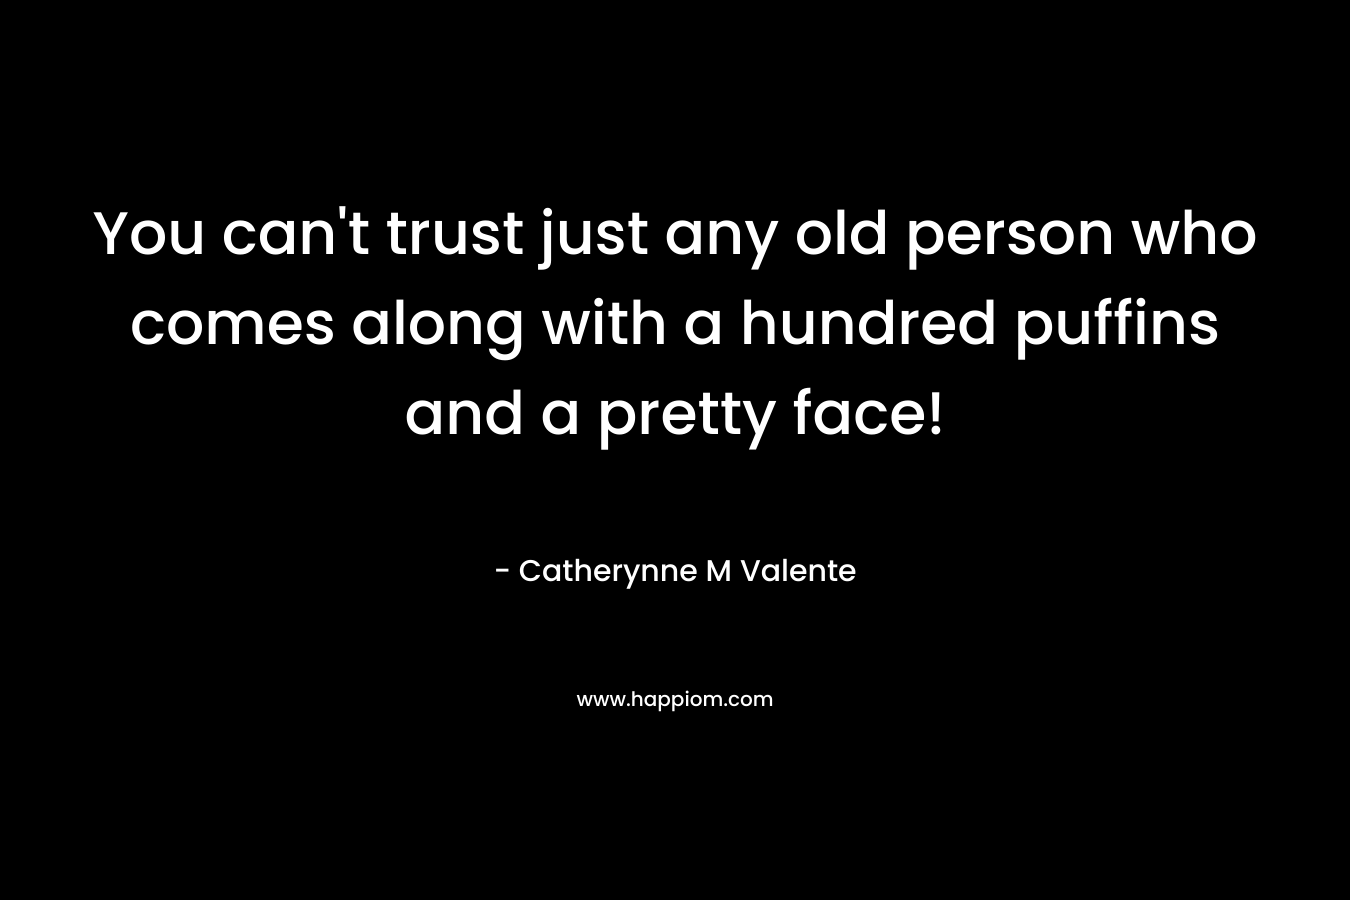 You can’t trust just any old person who comes along with a hundred puffins and a pretty face! – Catherynne M Valente